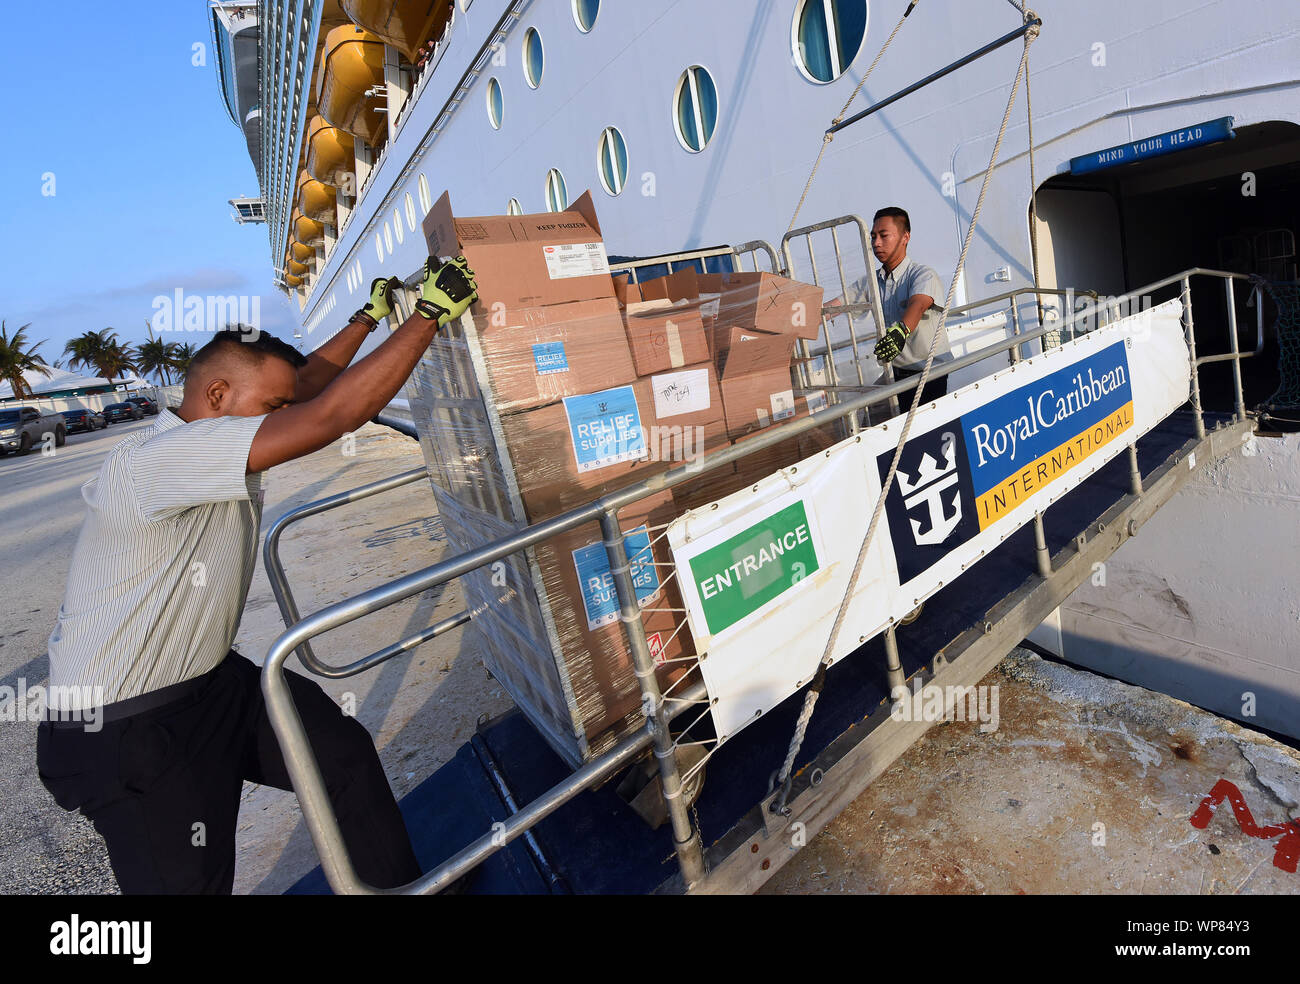 Freeport, The Bahamas. 07th Sep, 2019. September 7, 2019 - Freeport, Grand Bahama, Bahamas - Royal Caribbean International employees aboard the cruise ship Mariner of the Seas unload 20,000 meals for the victims of Hurricane Dorian on September 7, 2019 after arriving in Freeport, Grand Bahama. Hurricane Dorian hit the island chain as a category 5 storm, battering them for two days before moving north. Credit: Paul Hennessy/Alamy Live News Stock Photo